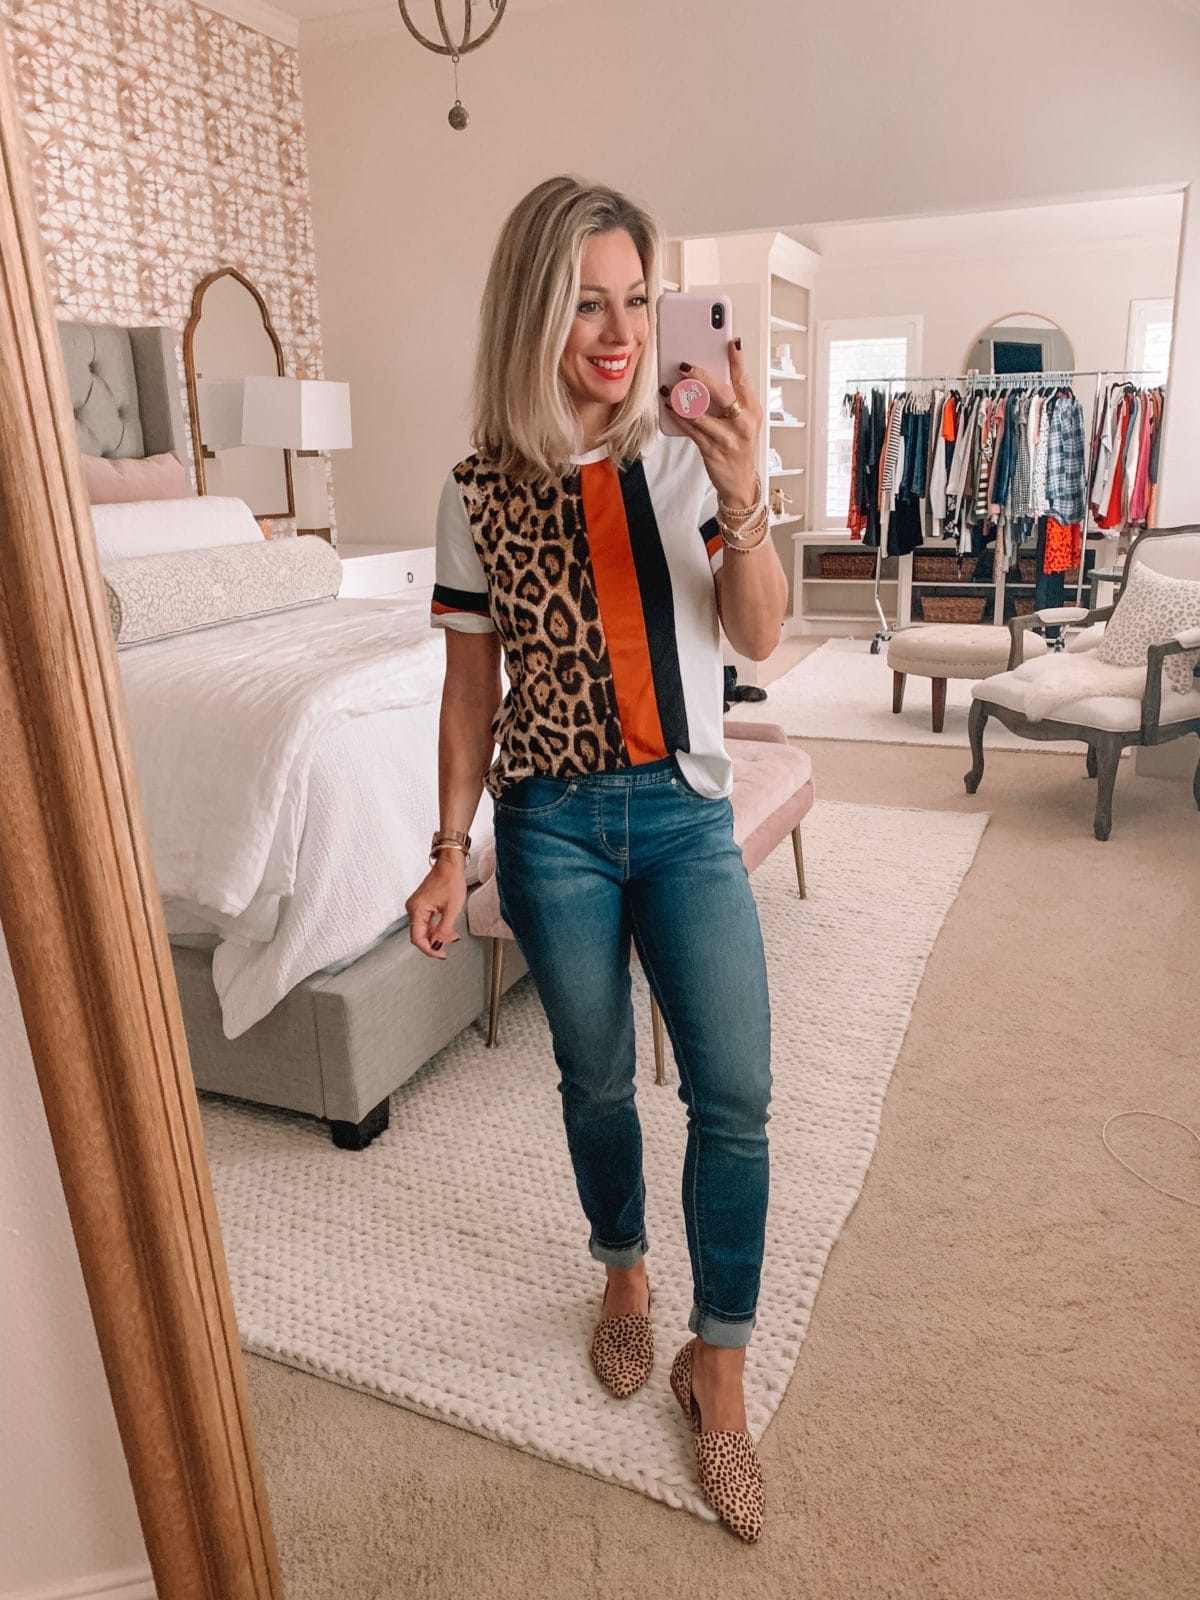 Amazon fashion haul, color block top and jeans 